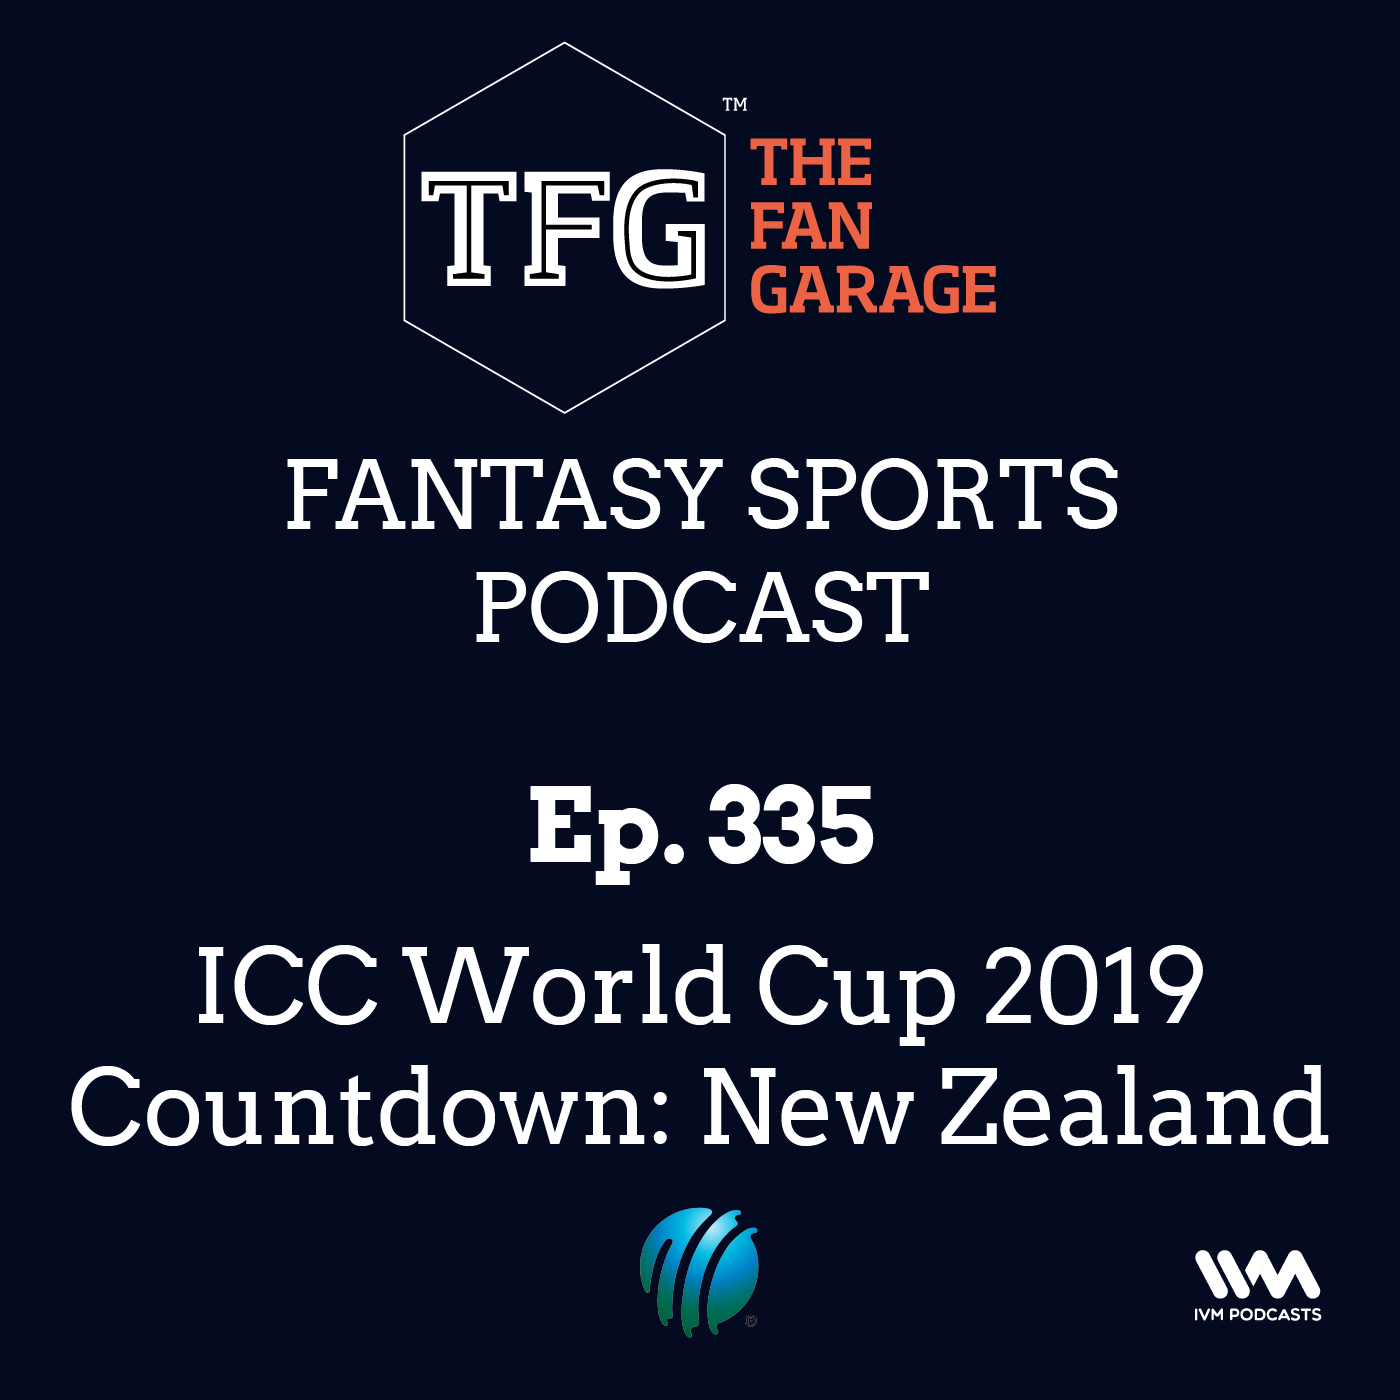 TFG Fantasy Sports Podcast Ep. 335: ICC World Cup 2019 Countdown: New Zealand